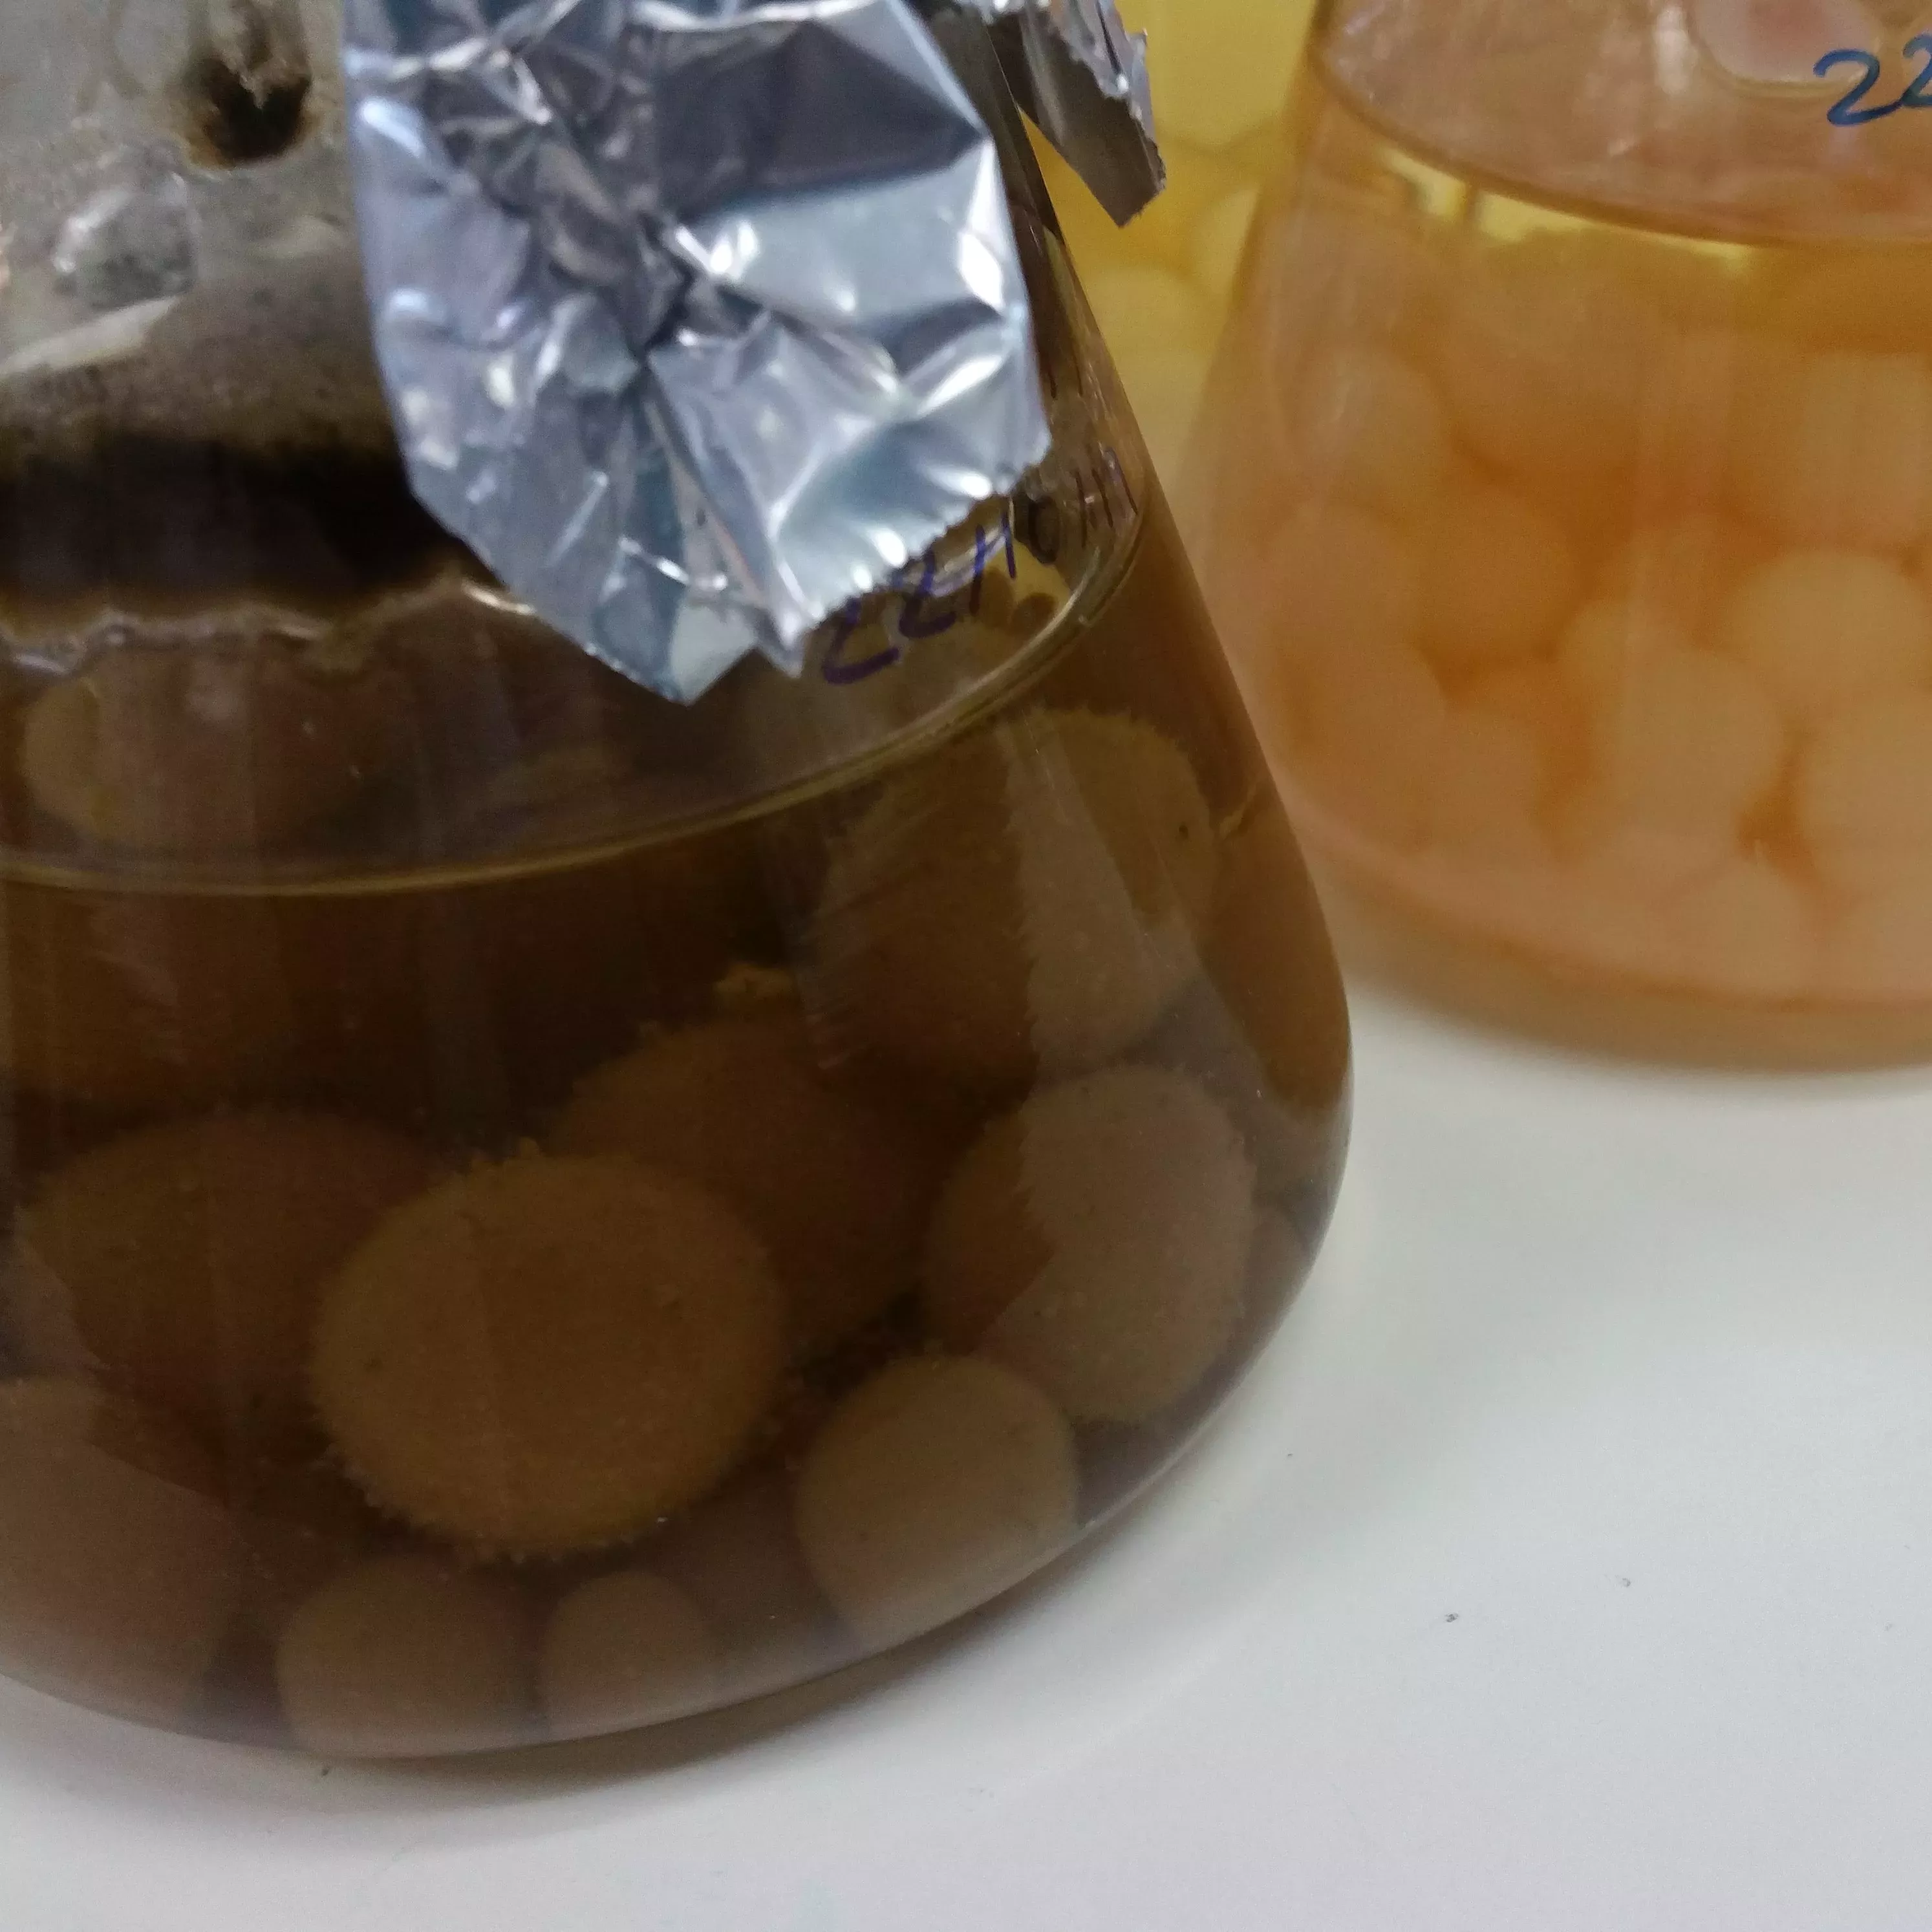 Balls of fungus floating in a conical flask liquid